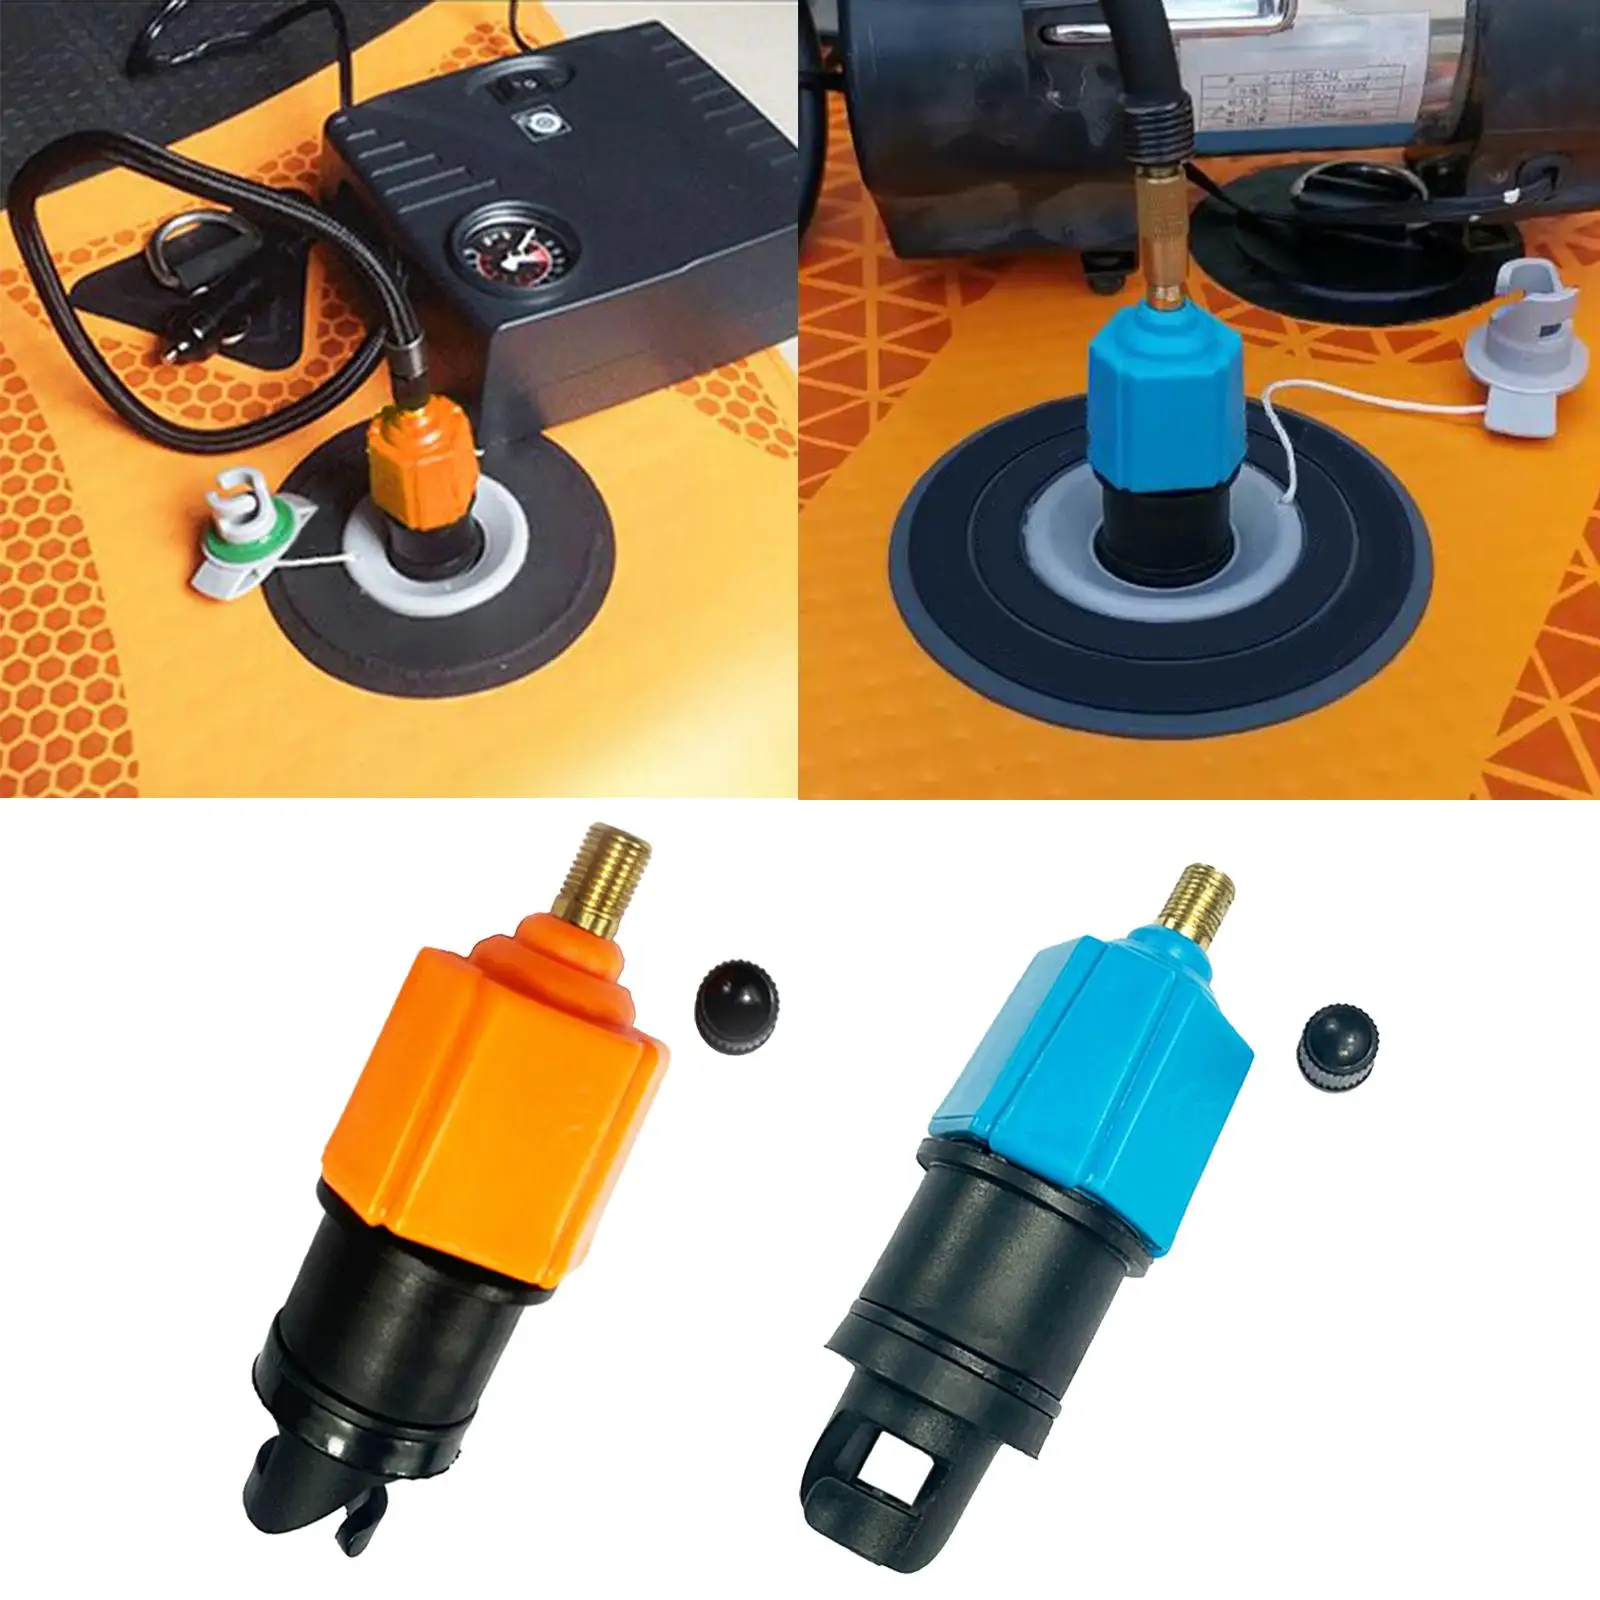 Inflatable Pump Adapter, Canoe Rowing Boat Pumping Nozzle, Pump Valve Adaptor for Kayak,  Board, Inflatable Boat